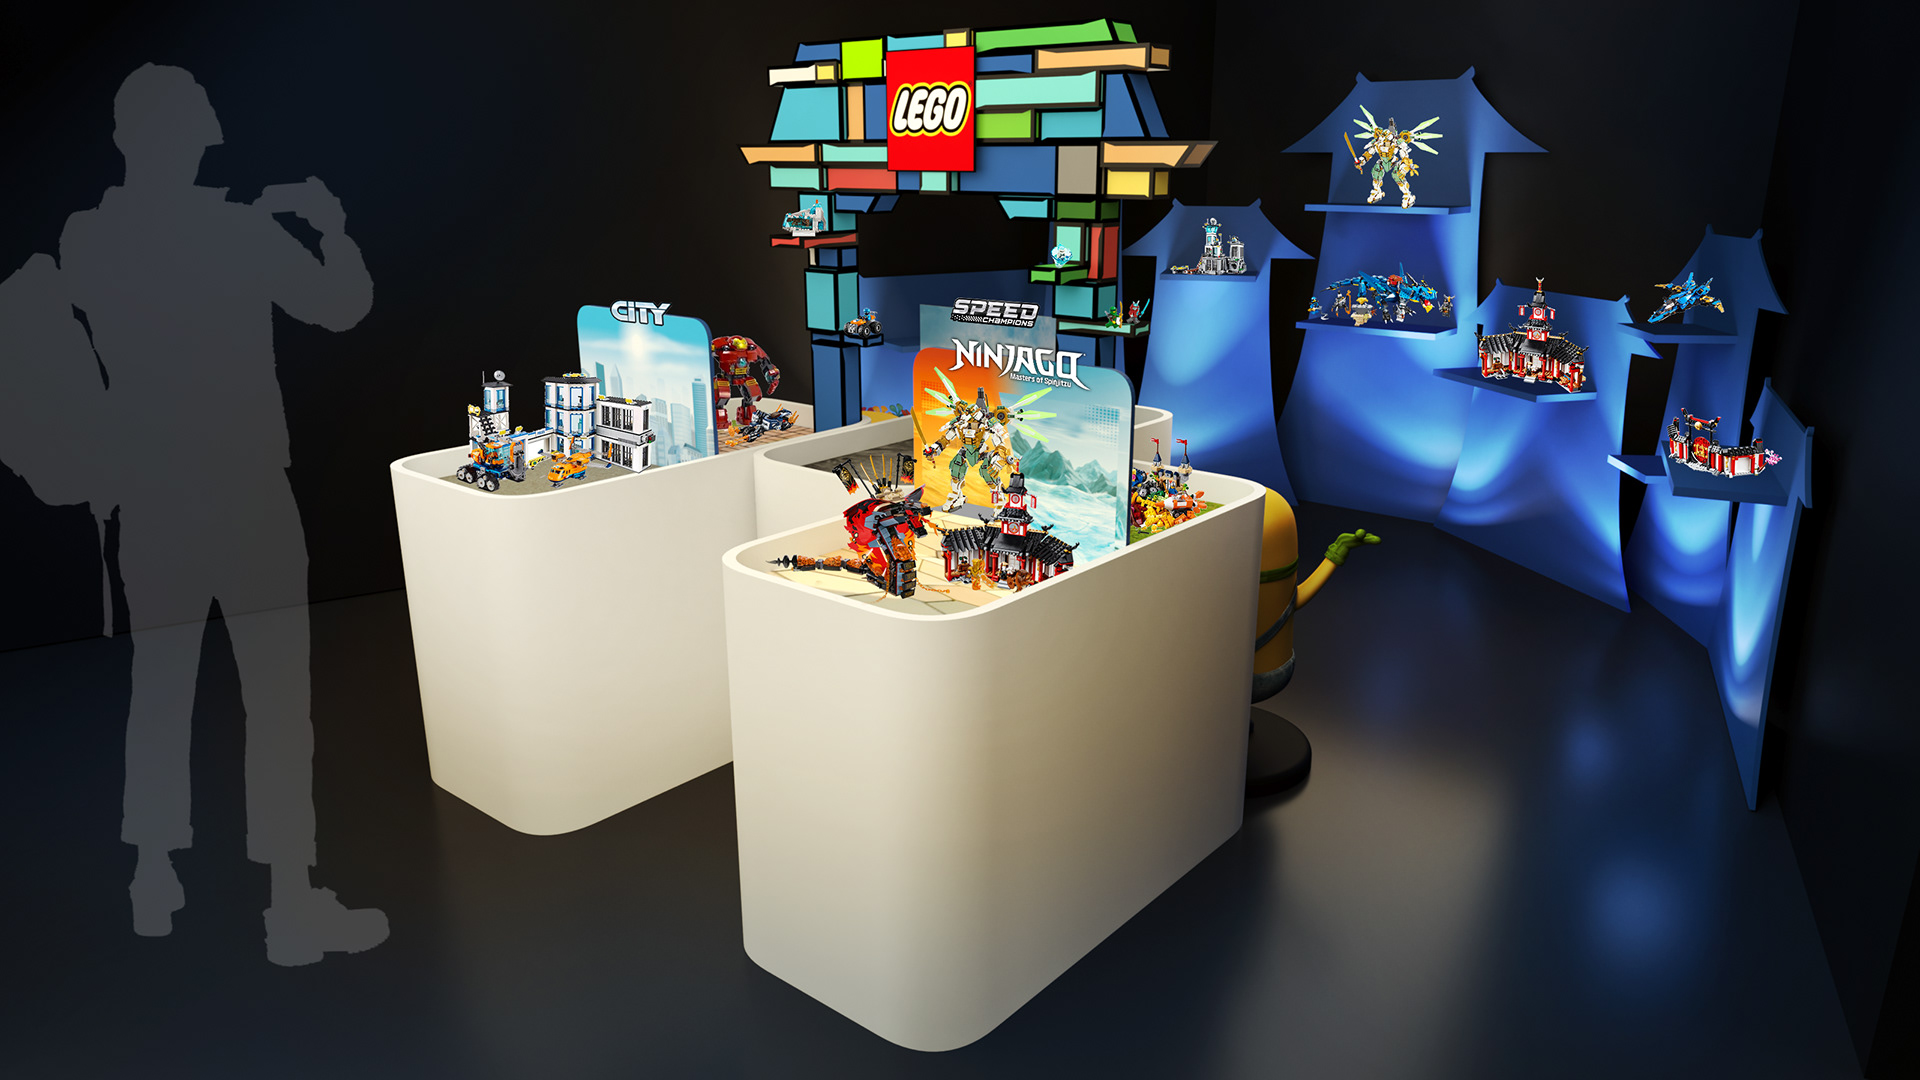 LEGO CNY product Launch Event Concept | Behance